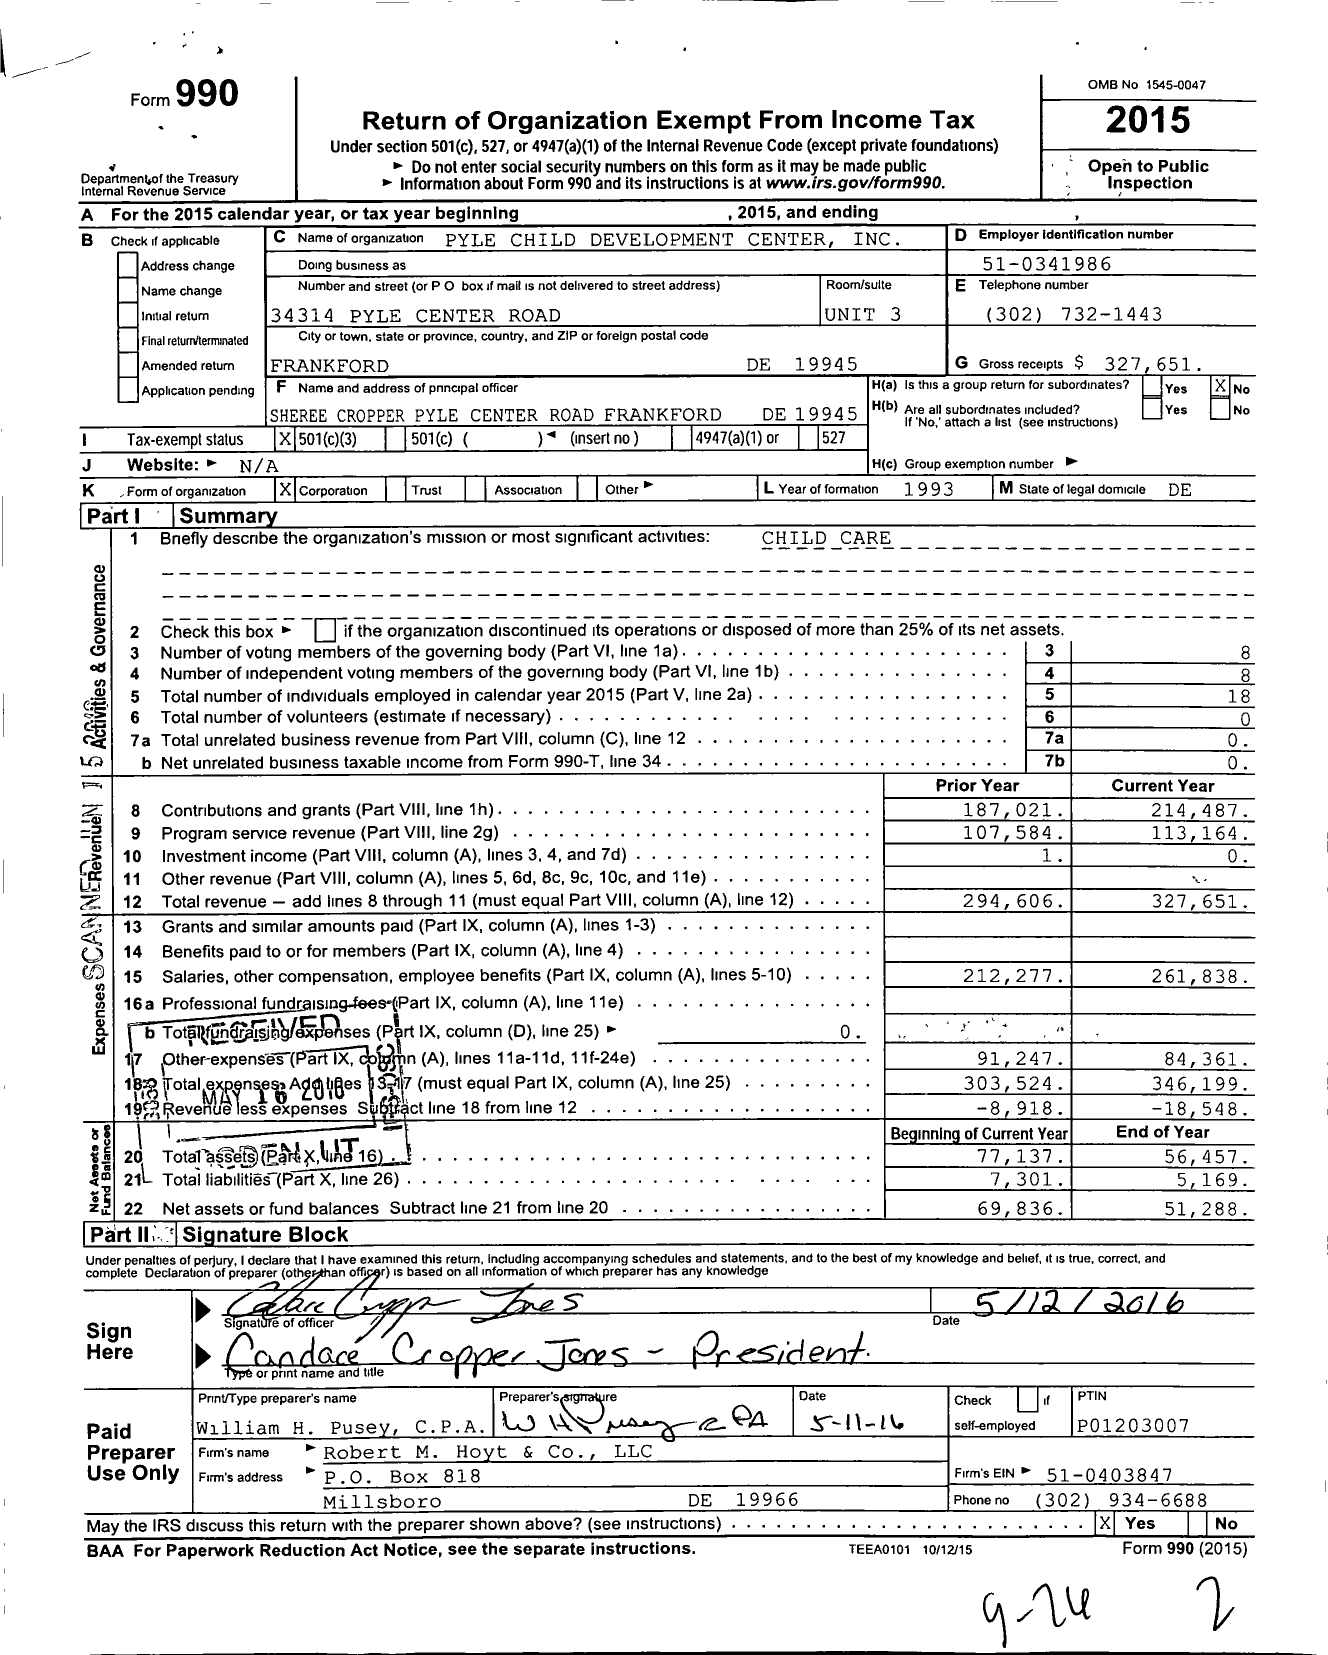 Image of first page of 2015 Form 990 for Pyle Child Development Center